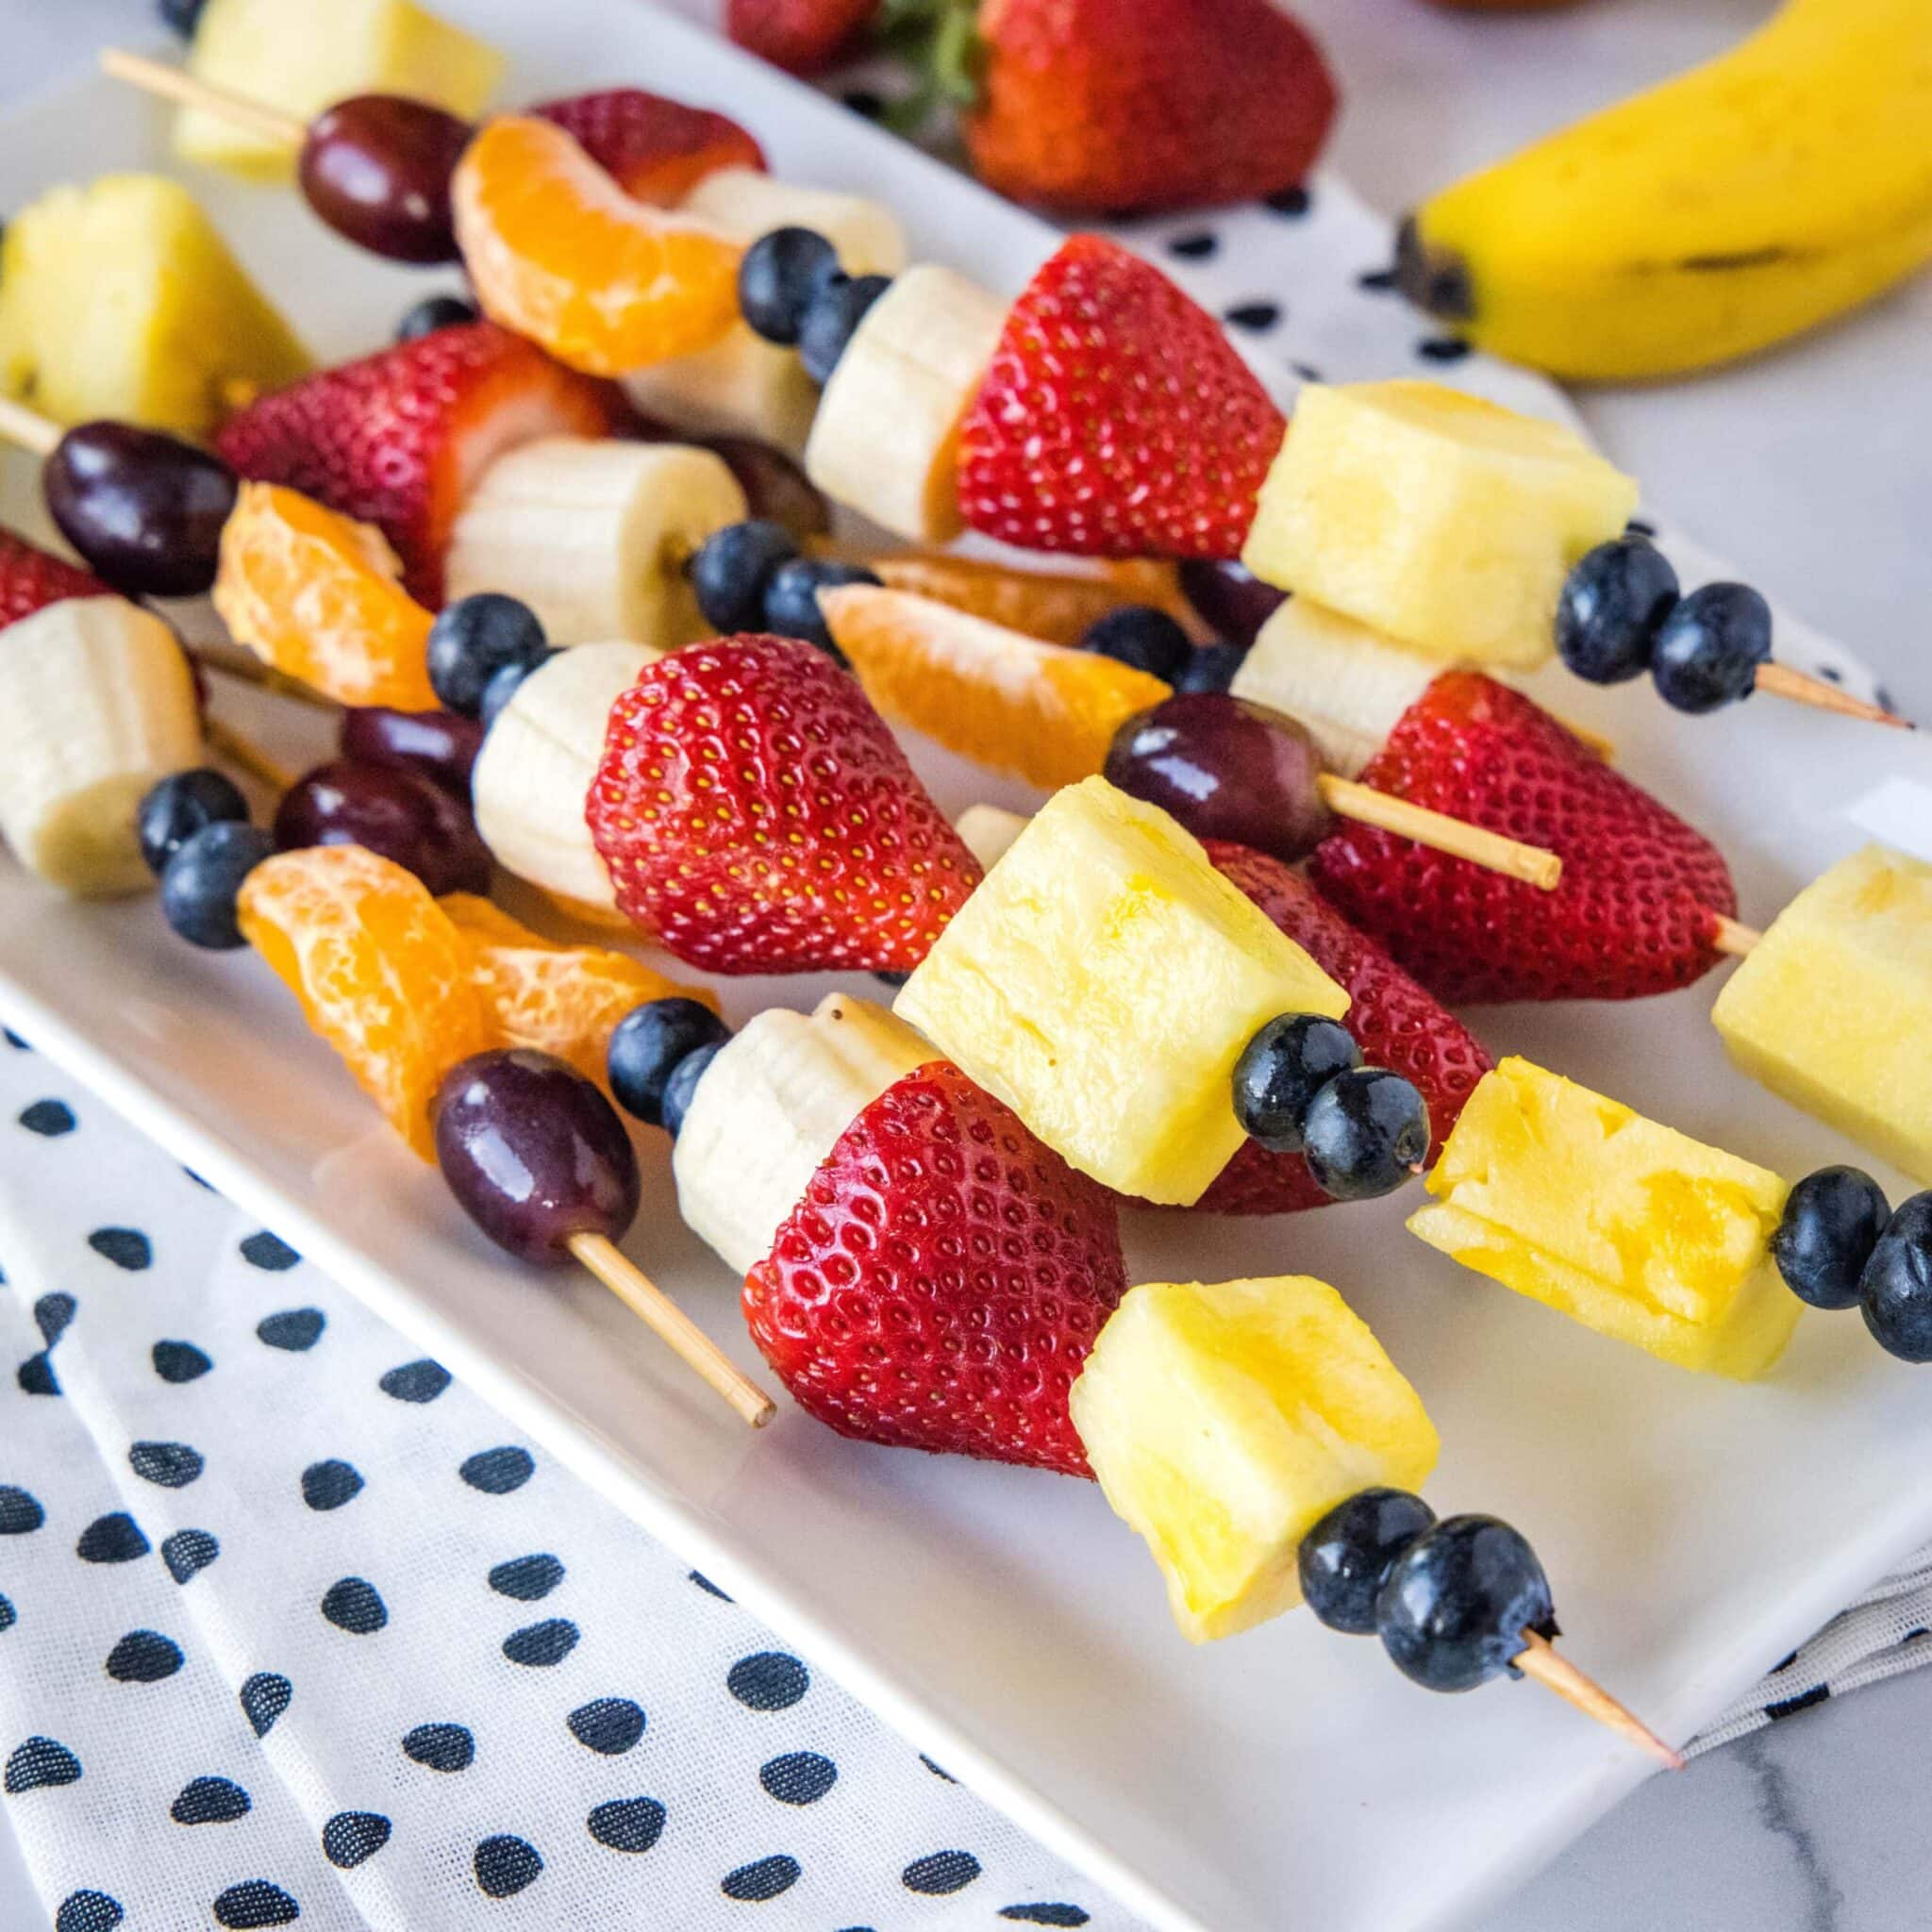 Fruit skewers on a white plate with polka dots.